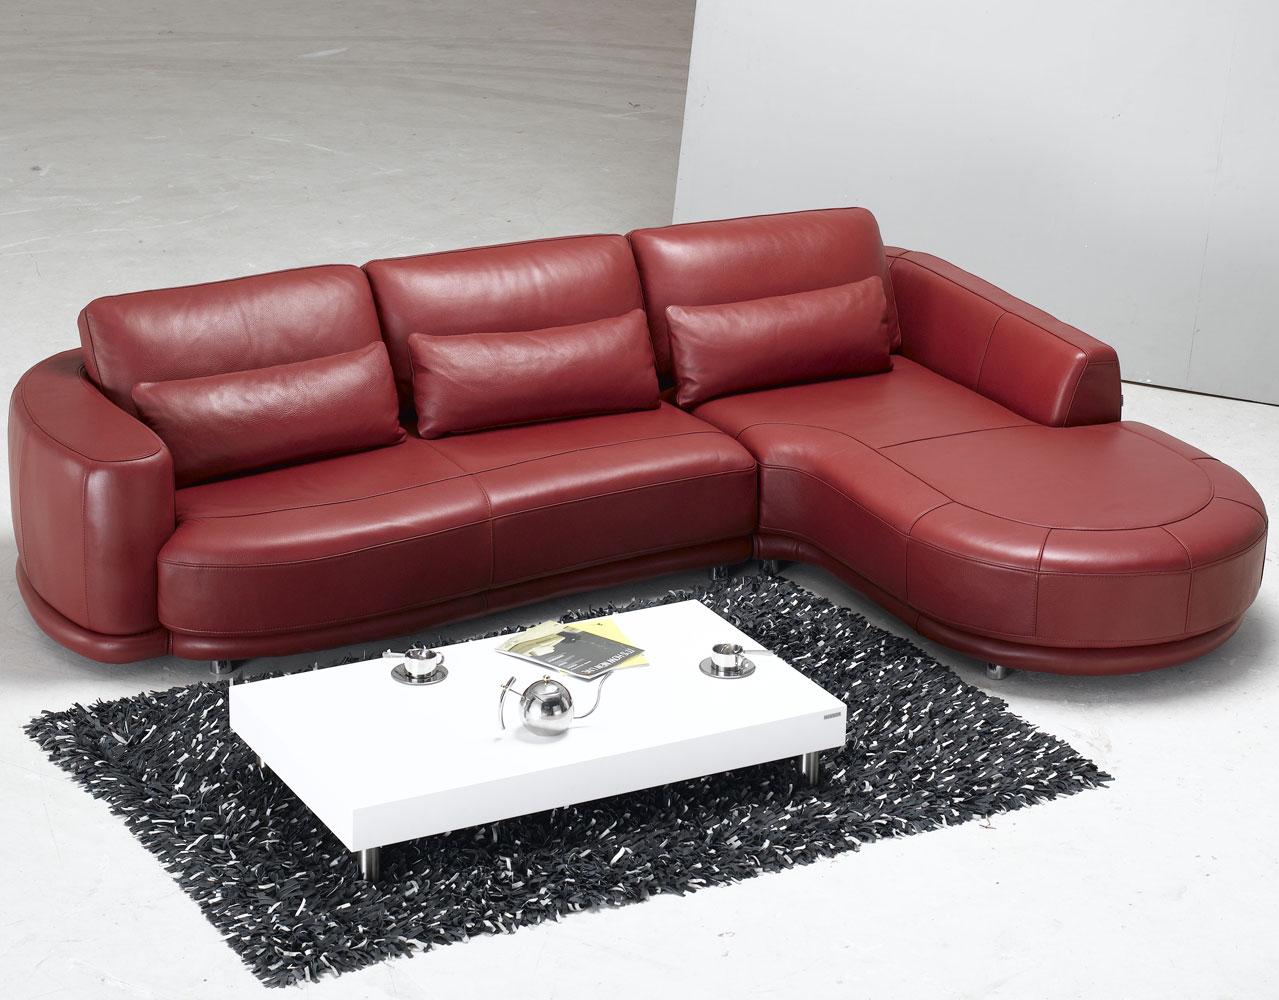 Classic Living With Appealing Classic Living Room Design With Red Leather Sofa White Colored Low Table Made From Wood And Black Shag Carpet Furniture Outstanding Living Room Furnished With A Red Leather Couch Or Sofa Sets